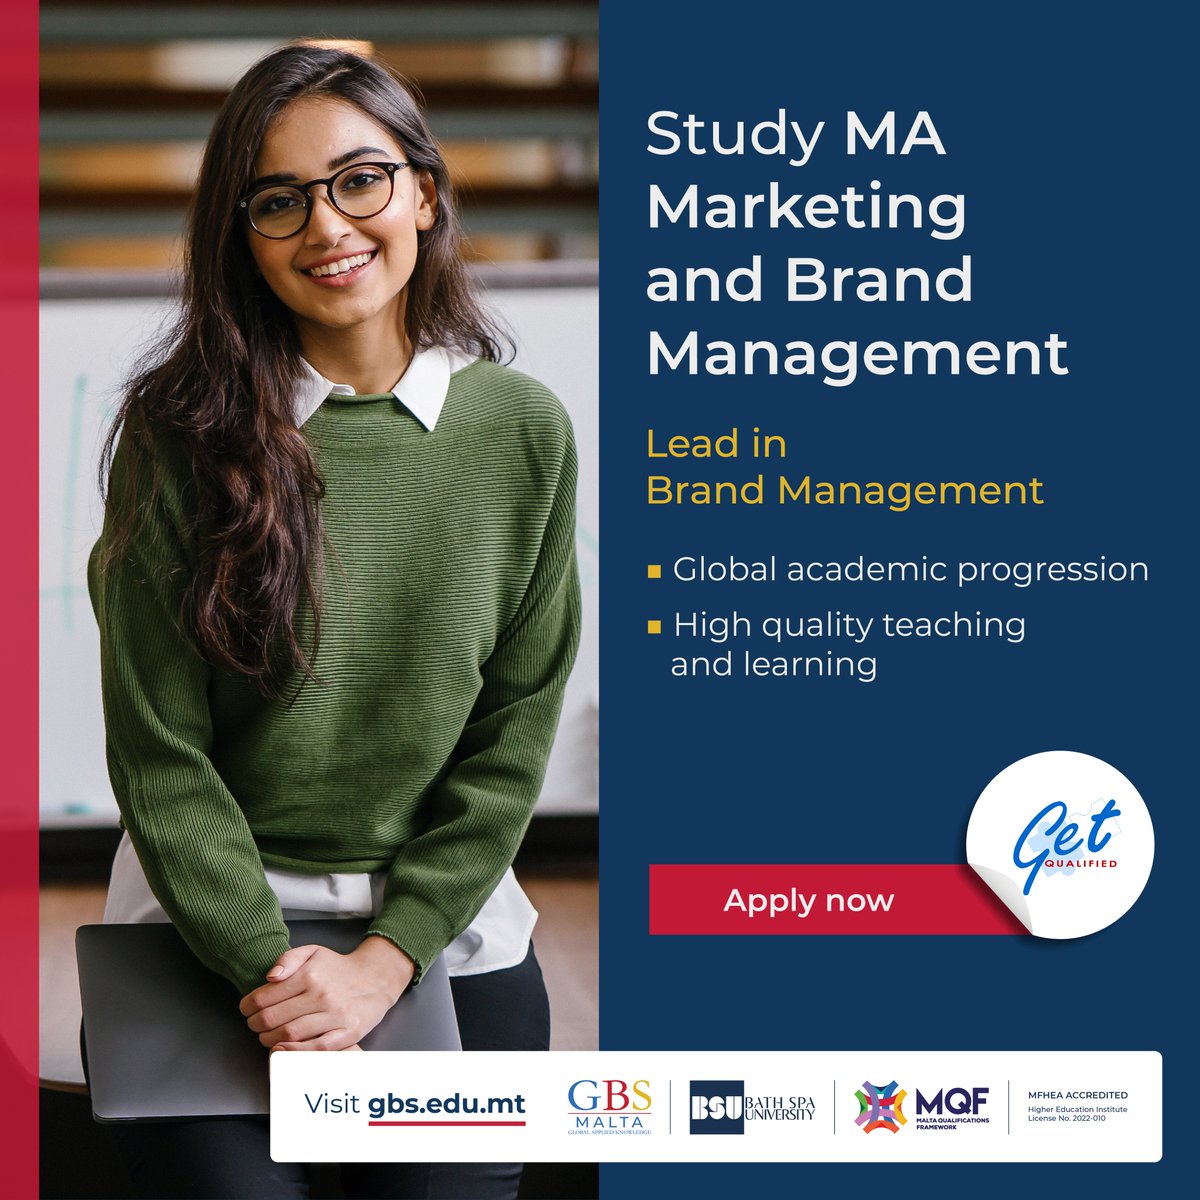 Ready to elevate your career in marketing and brand management?

Explore our MQRIC Accredited Master's programme at GBS Malta, awarded by Bath Spa University. 

Apply now for the next intake: bit.ly/4aAtaxt

#GBSMalta #MarketingMasters #InvestInYourFuture